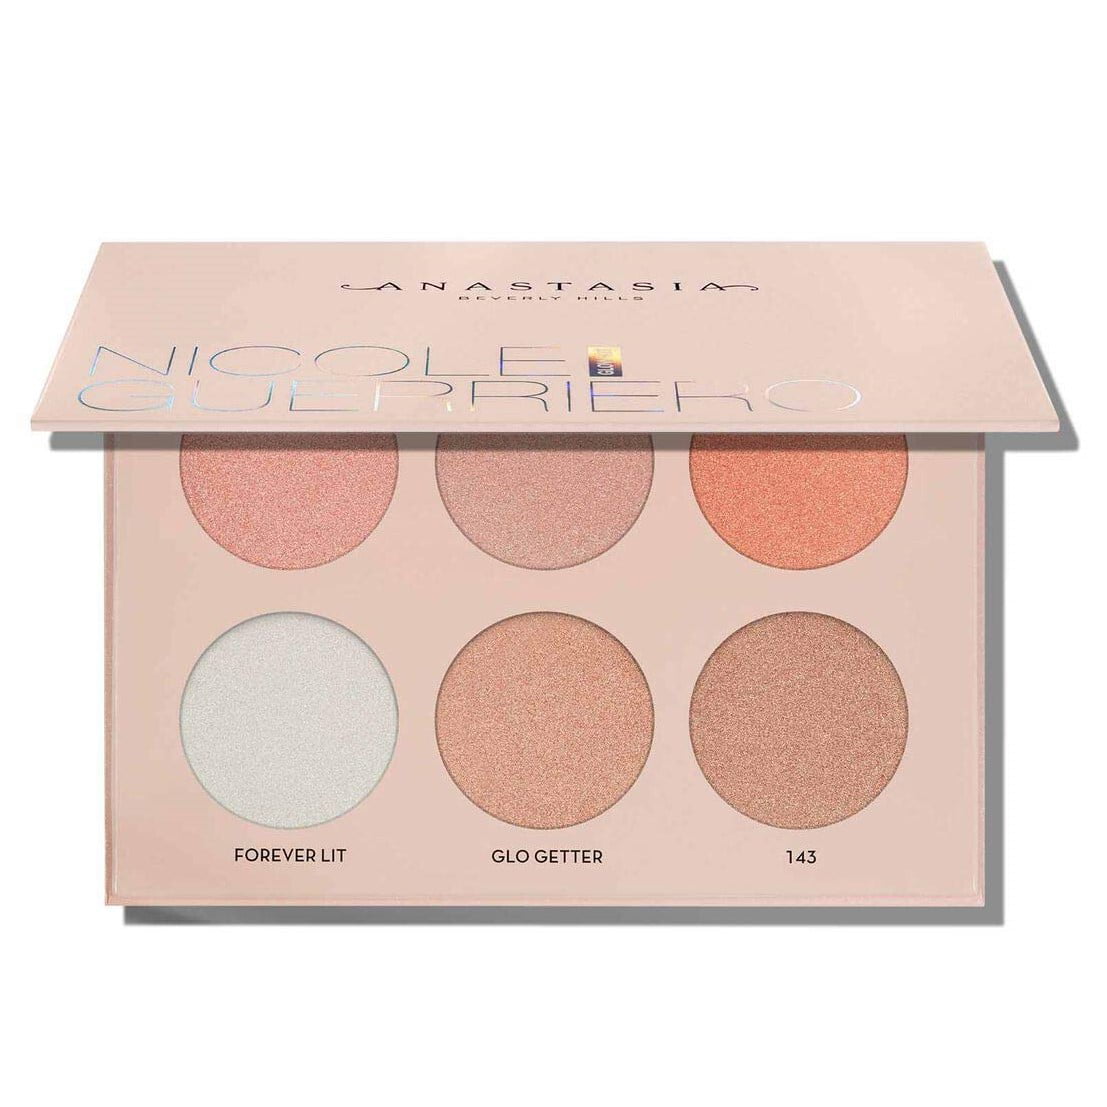 ANASTASIA BEVERLY HILLS COLOR GUERRIERO 0.16 PALETTE HILLS/ NICOLE OZ HIGHLIGHTING 0.16 SHADES 6 EYES, ANASTASIA BEVERLY FACE&BODY OZ/4.5G GLOW ANASTASIA KIT